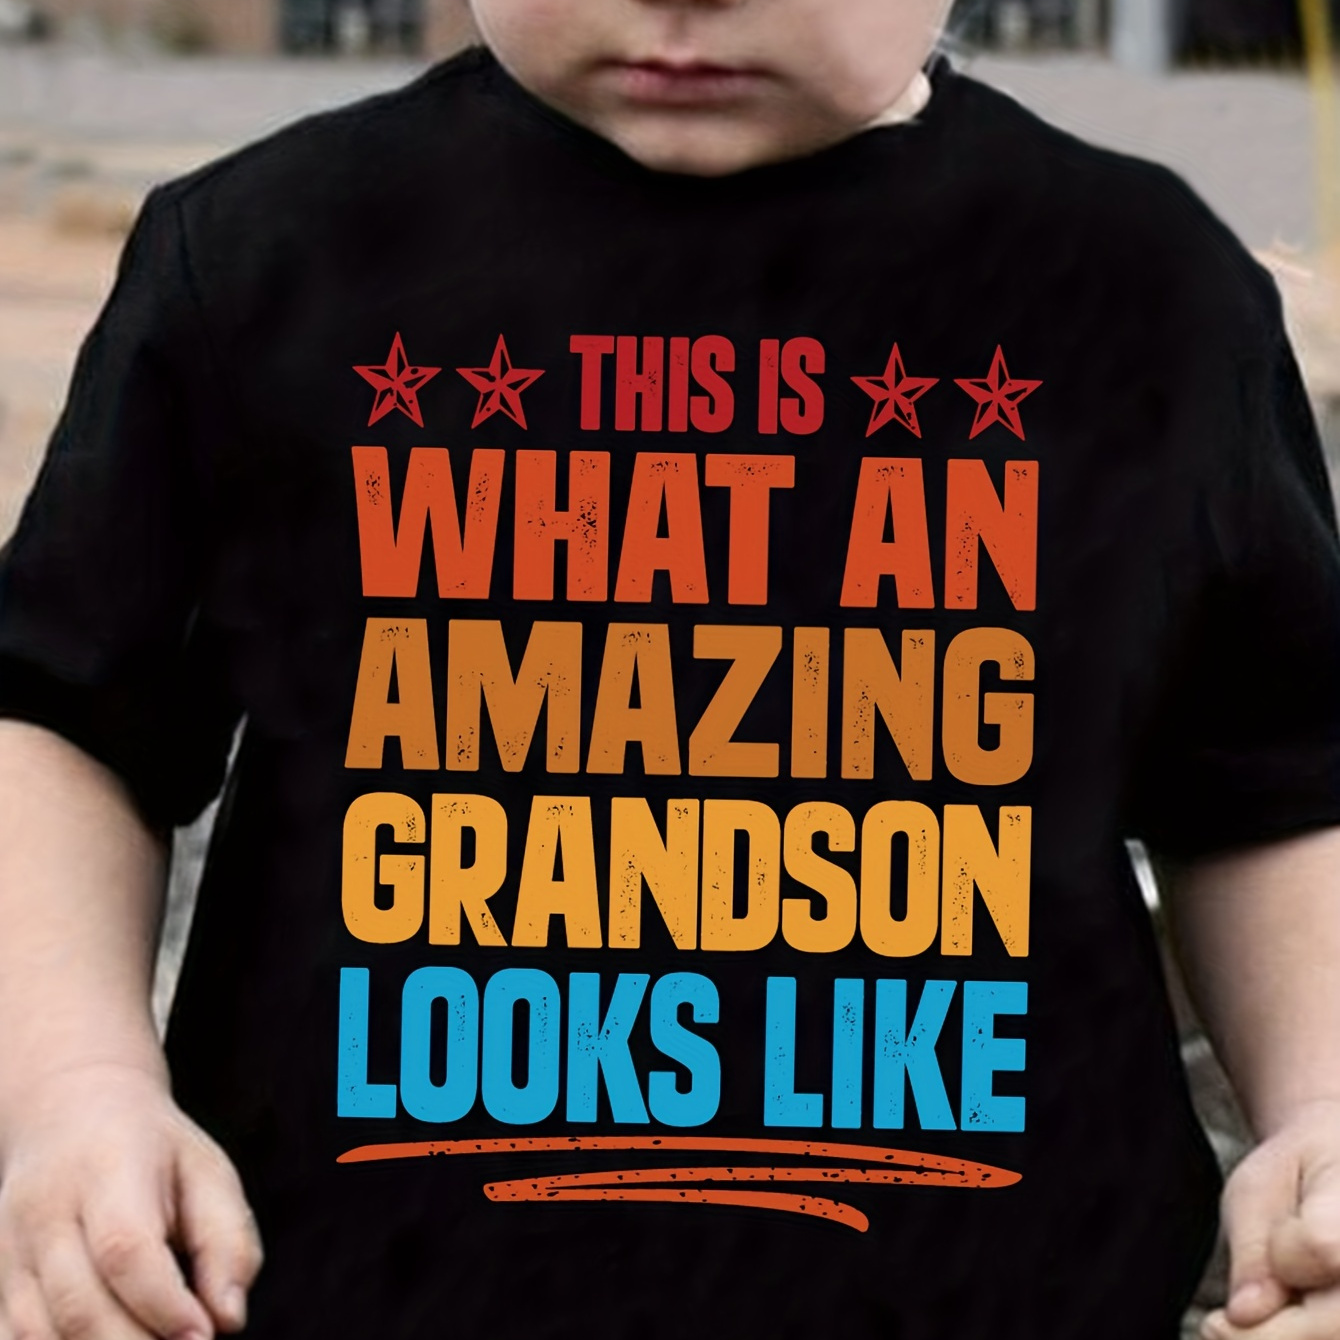 

This Is What An Amazing Grandson Looks Like Colorful Letter Print Boys T-shirt - Vibrant Short Sleeve Tee For Summer Fun - Casual Style For Boys And Girls